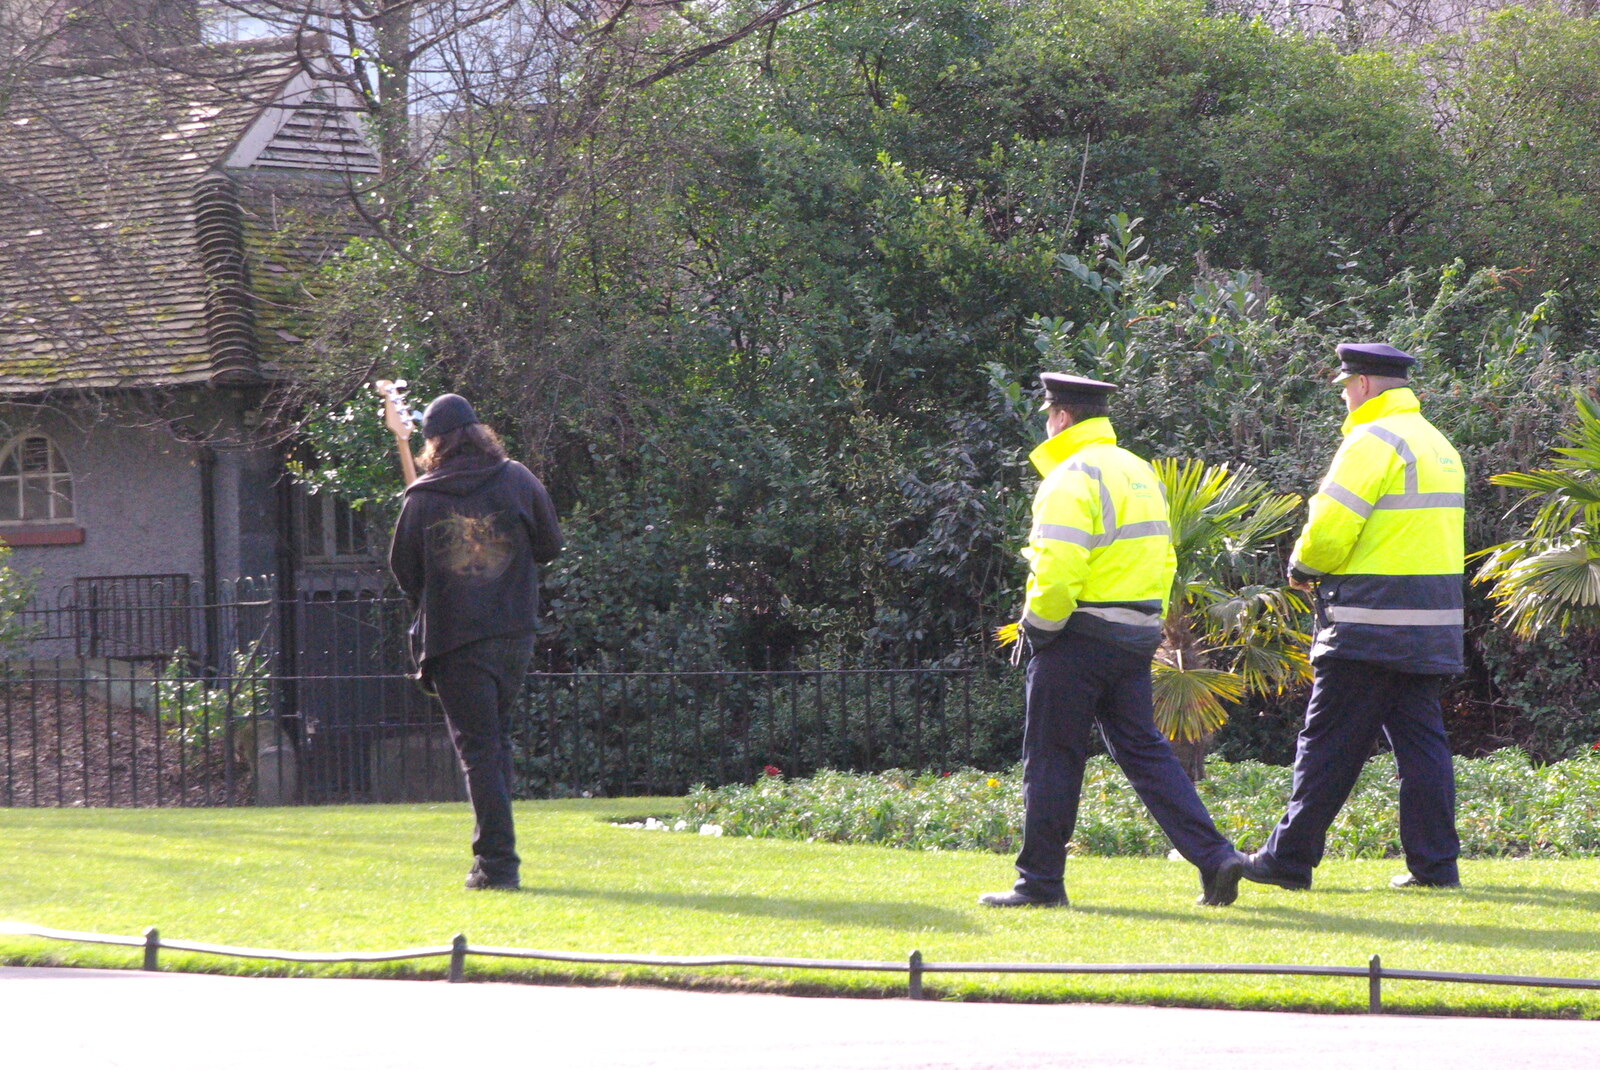 Easter in Dublin, Ireland - 21st March 2008: The Gardai hassle a dude who's waving a guitar